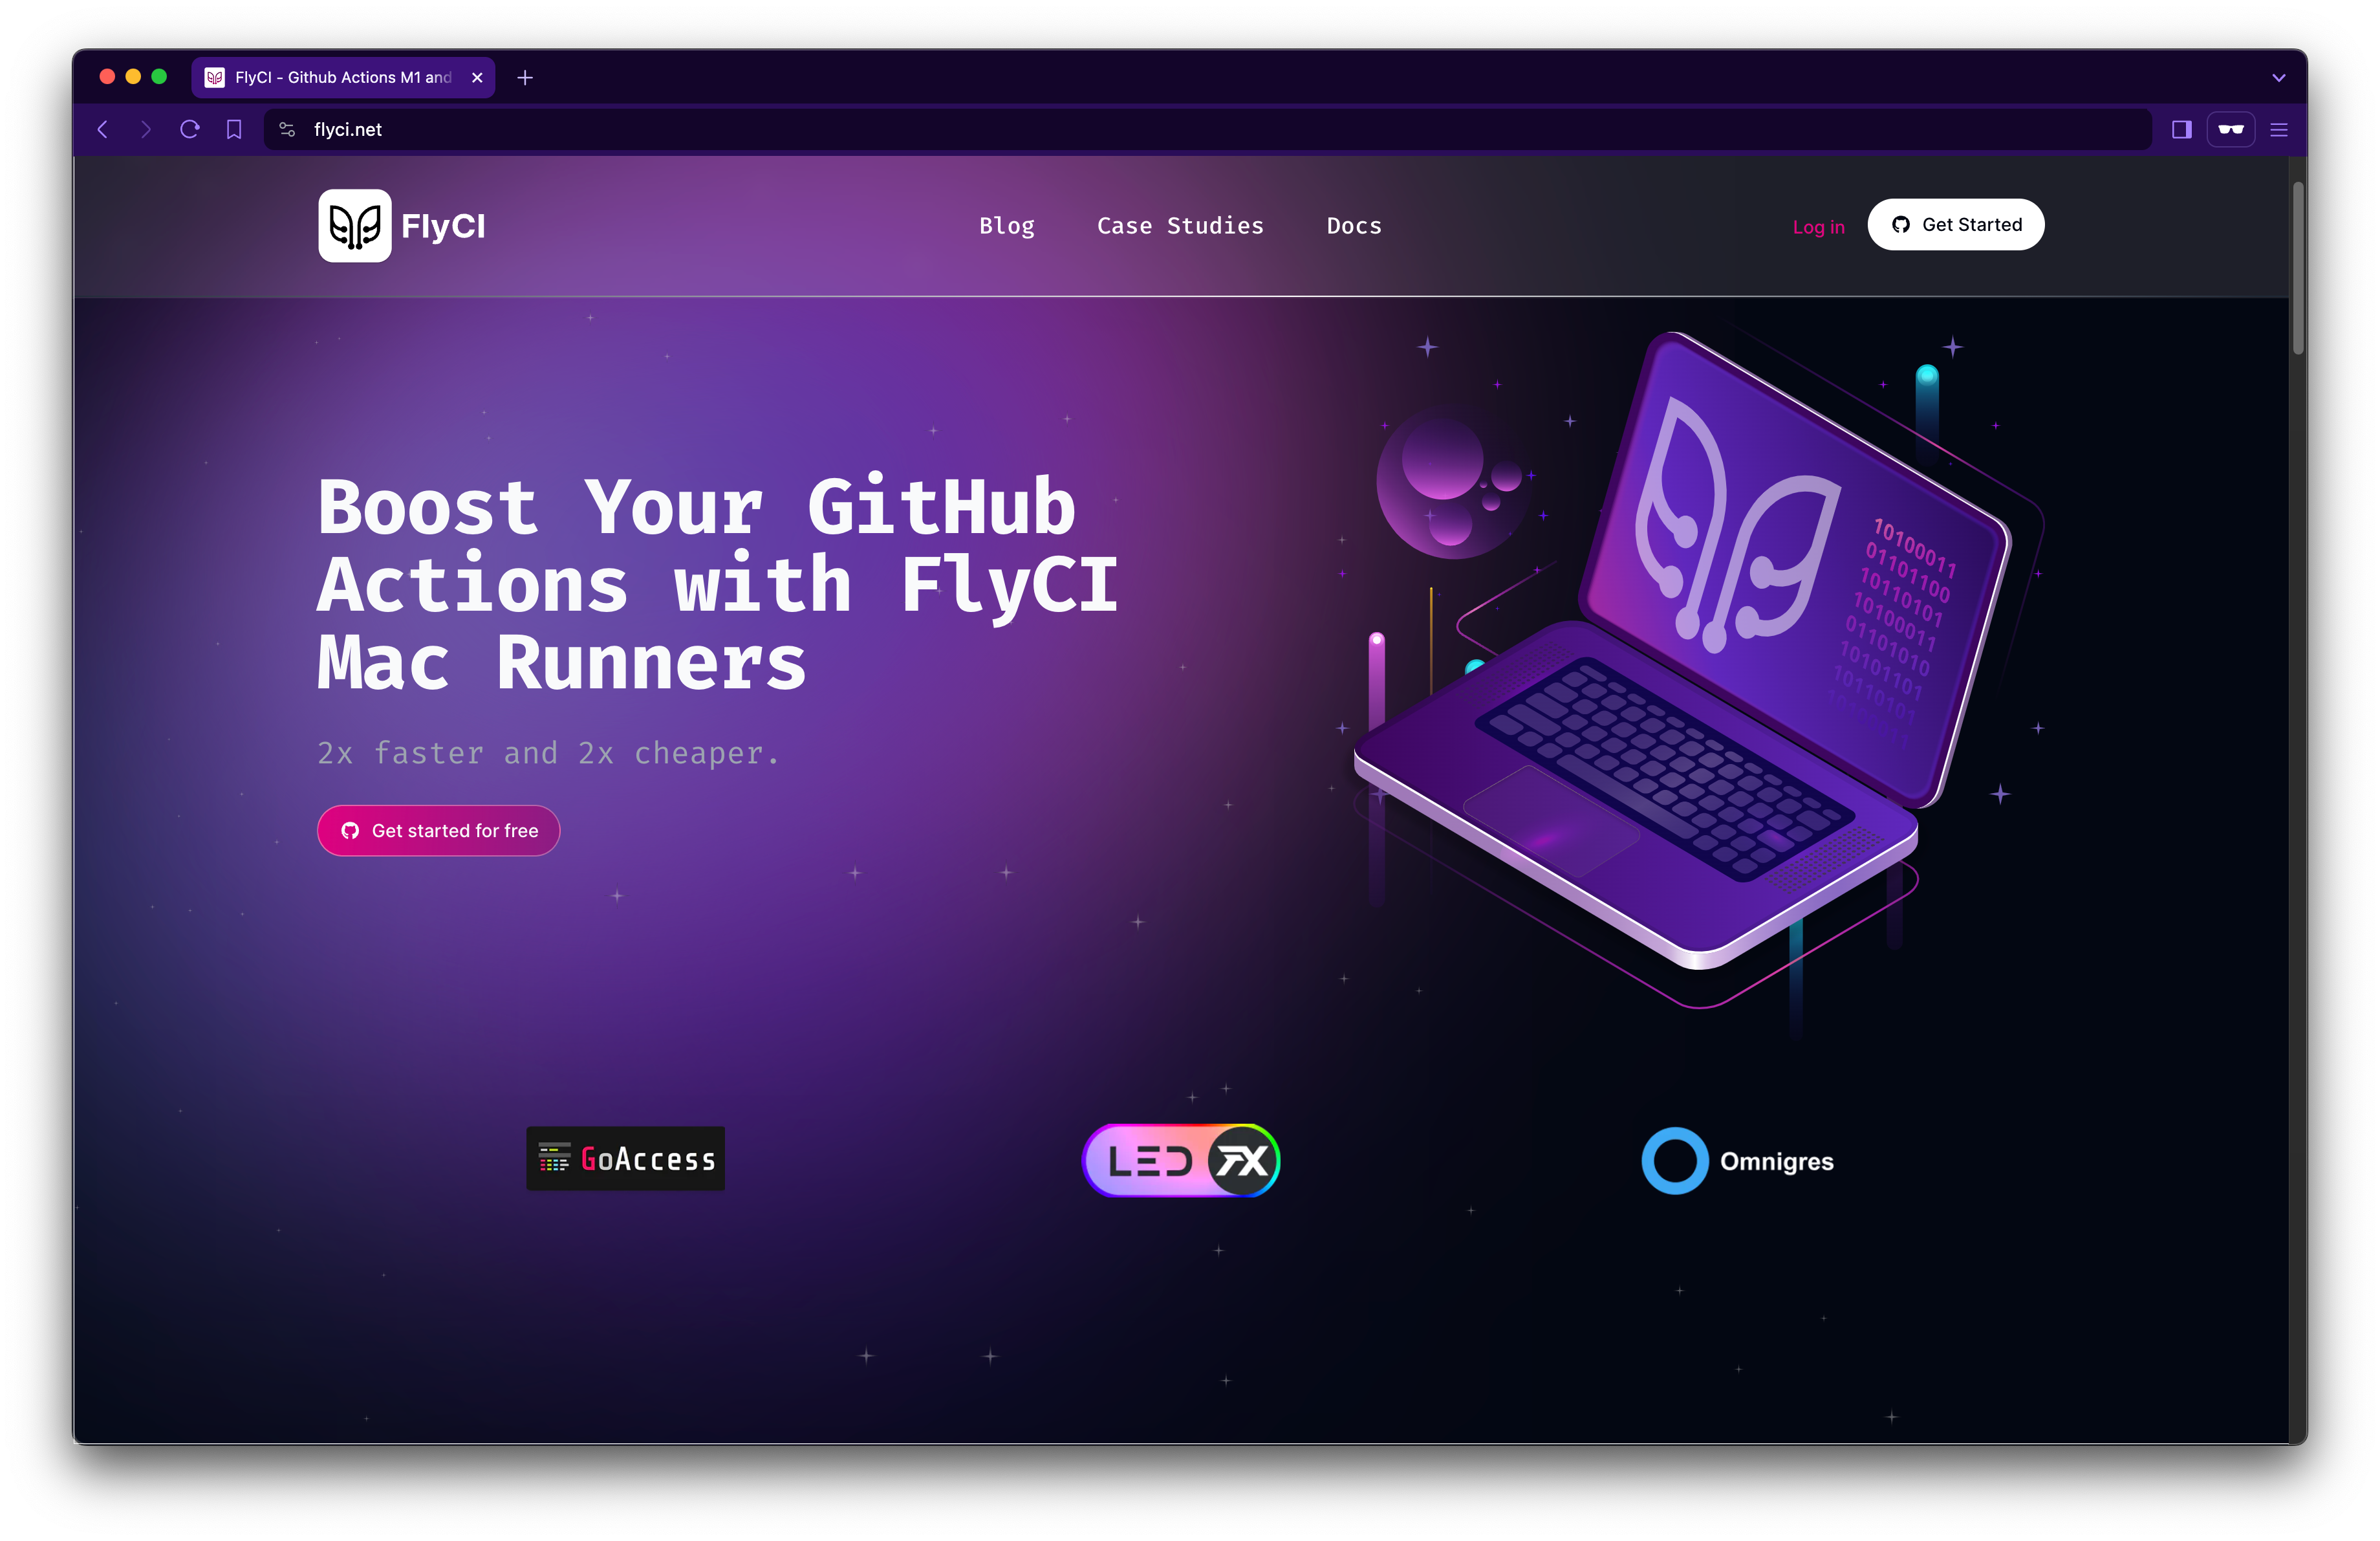 The FlyCI website homepage with a headline "Boost Your GitHub Actions with FlyCI Mac Runners", claiming increased speed and cost efficiency. It features a graphic of a laptop displaying the FlyCI logo and binary code, in a purple and blue color scheme. Partner logos and navigation options are also visible.